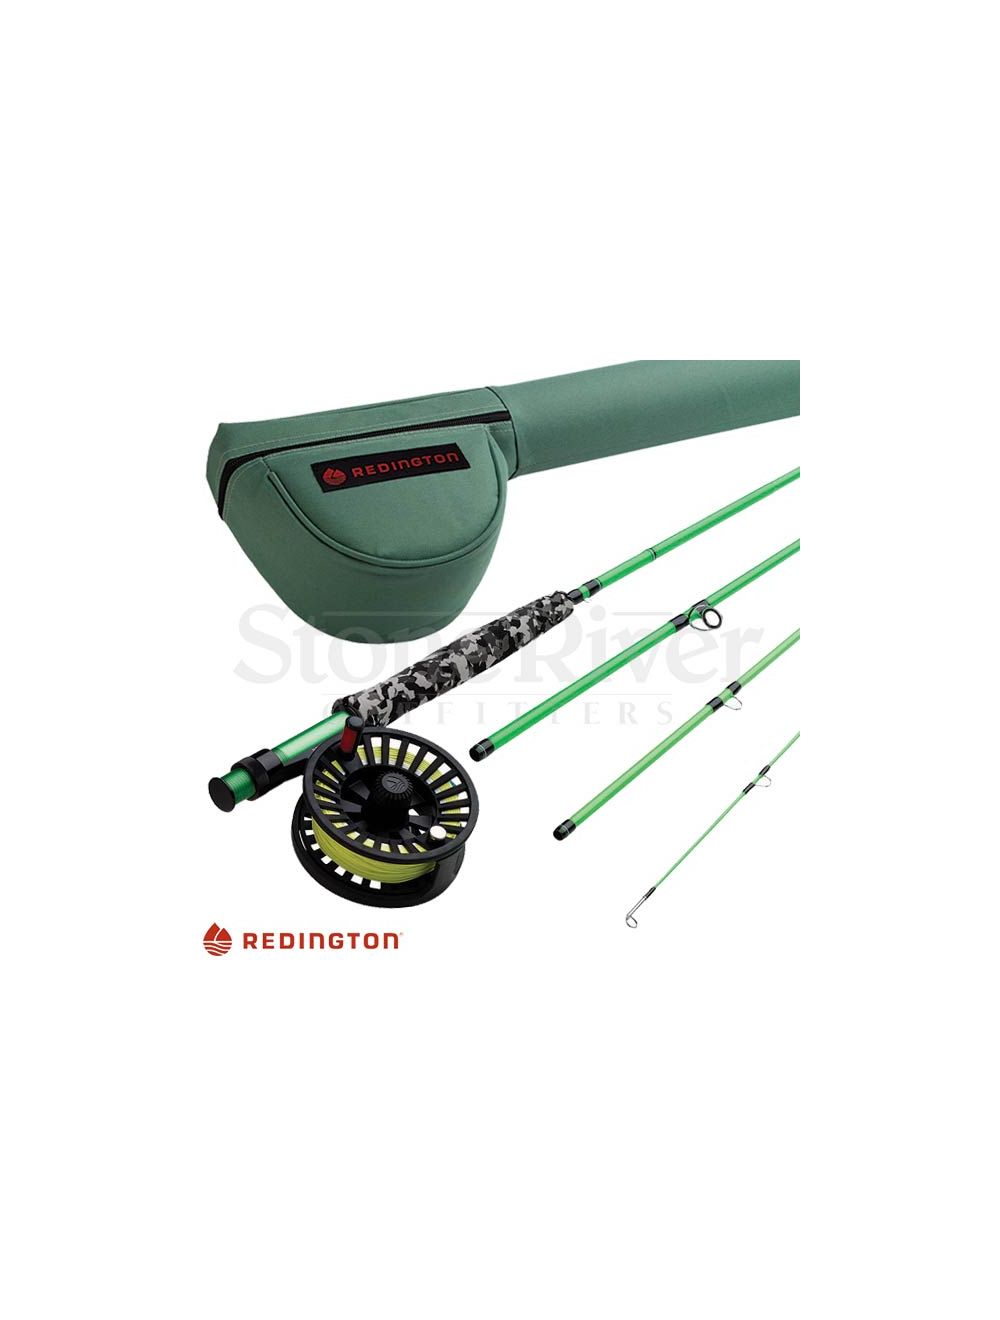 Combo - Redington Minnow Series 5wt Youth Outfit